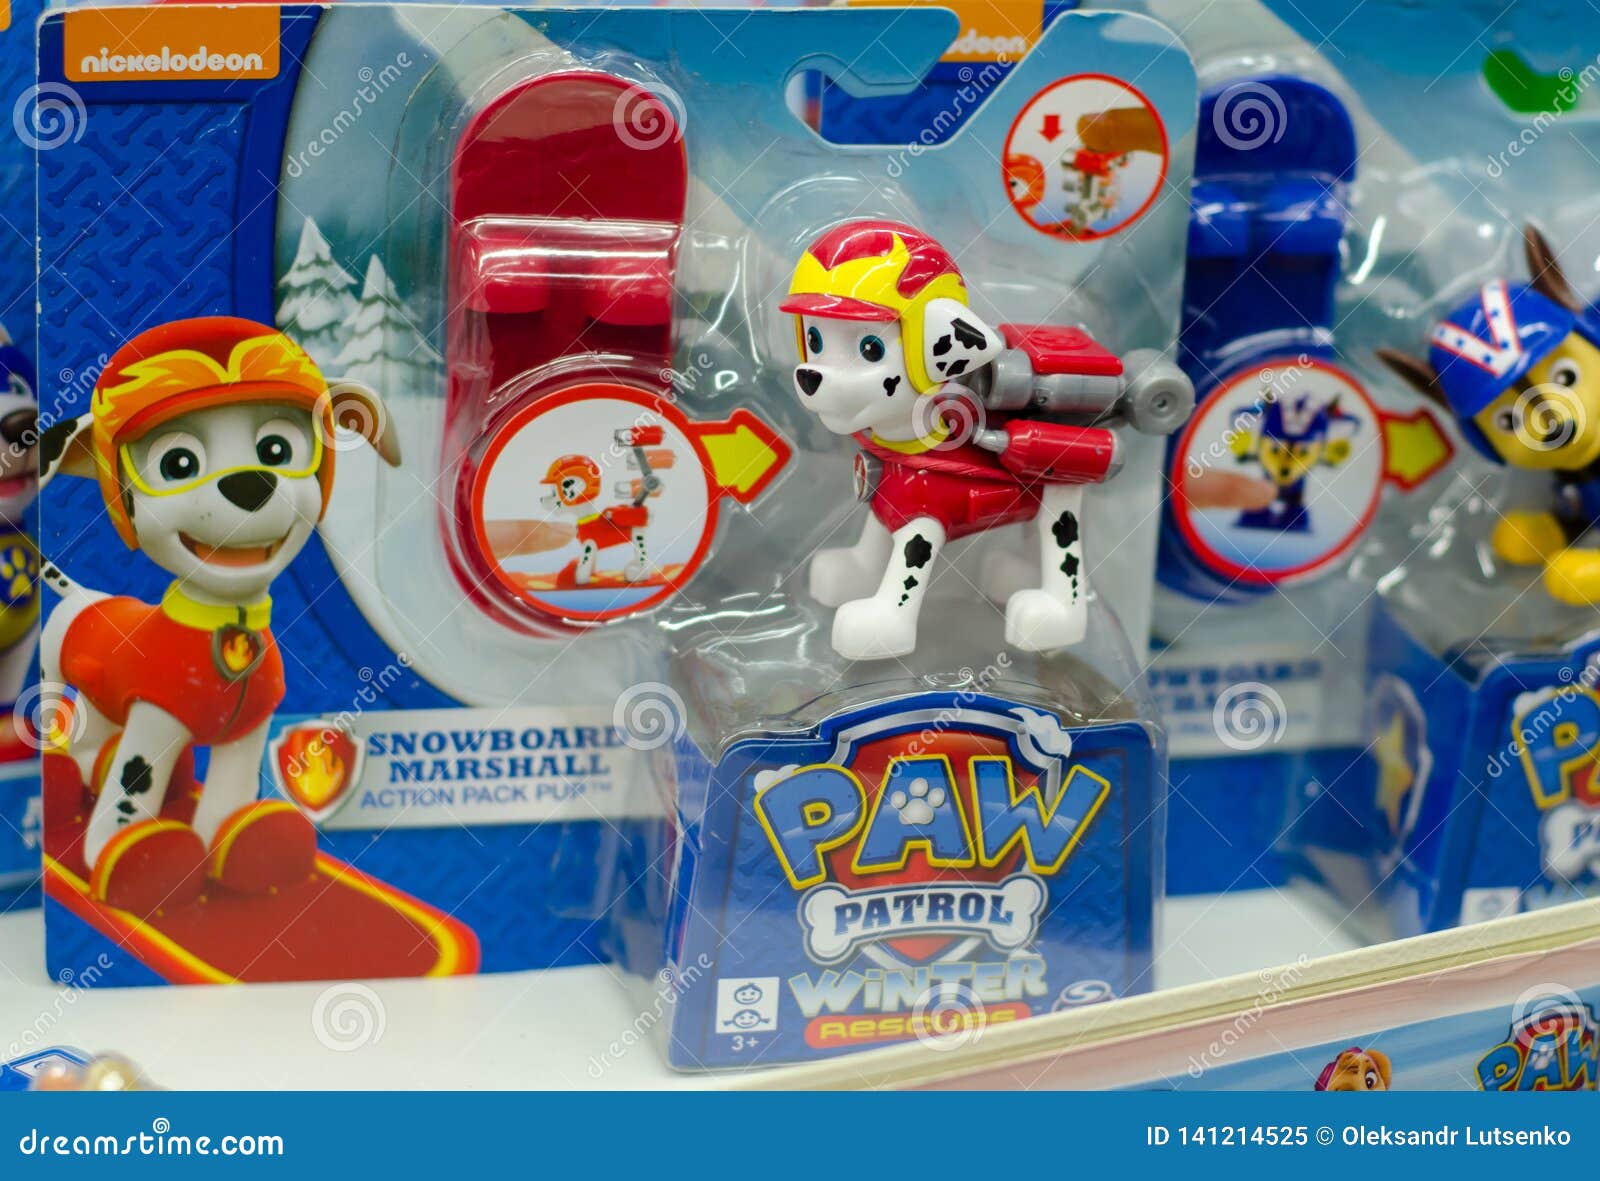 Kyiv, Ukraine - March 24, 2018: PAW Patrol Toys for Sale in the Supermarket Stand Editorial Image - Image of patrol, logo: